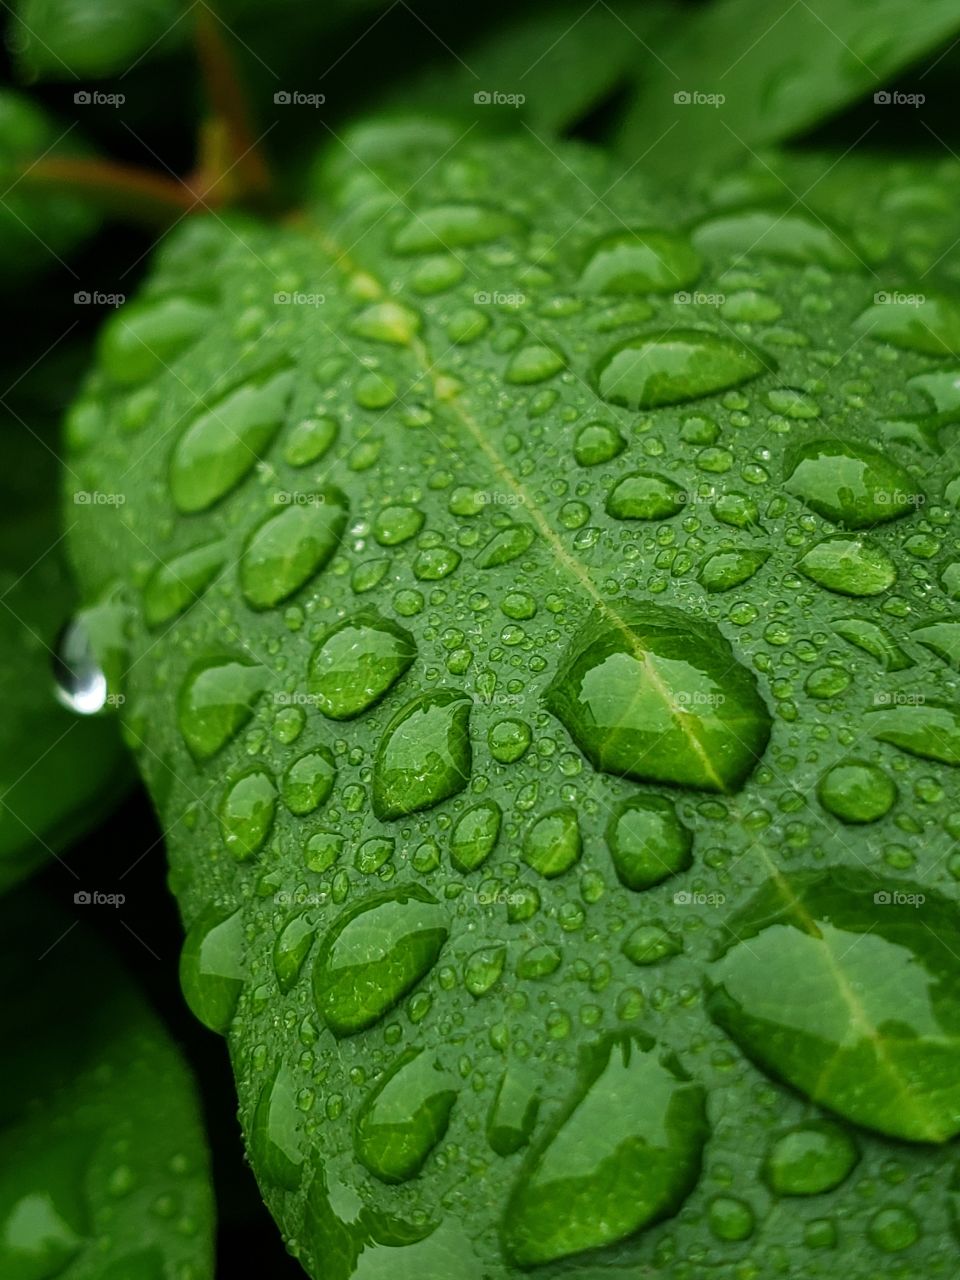 Beads of rain water on a vibrantly green leaf